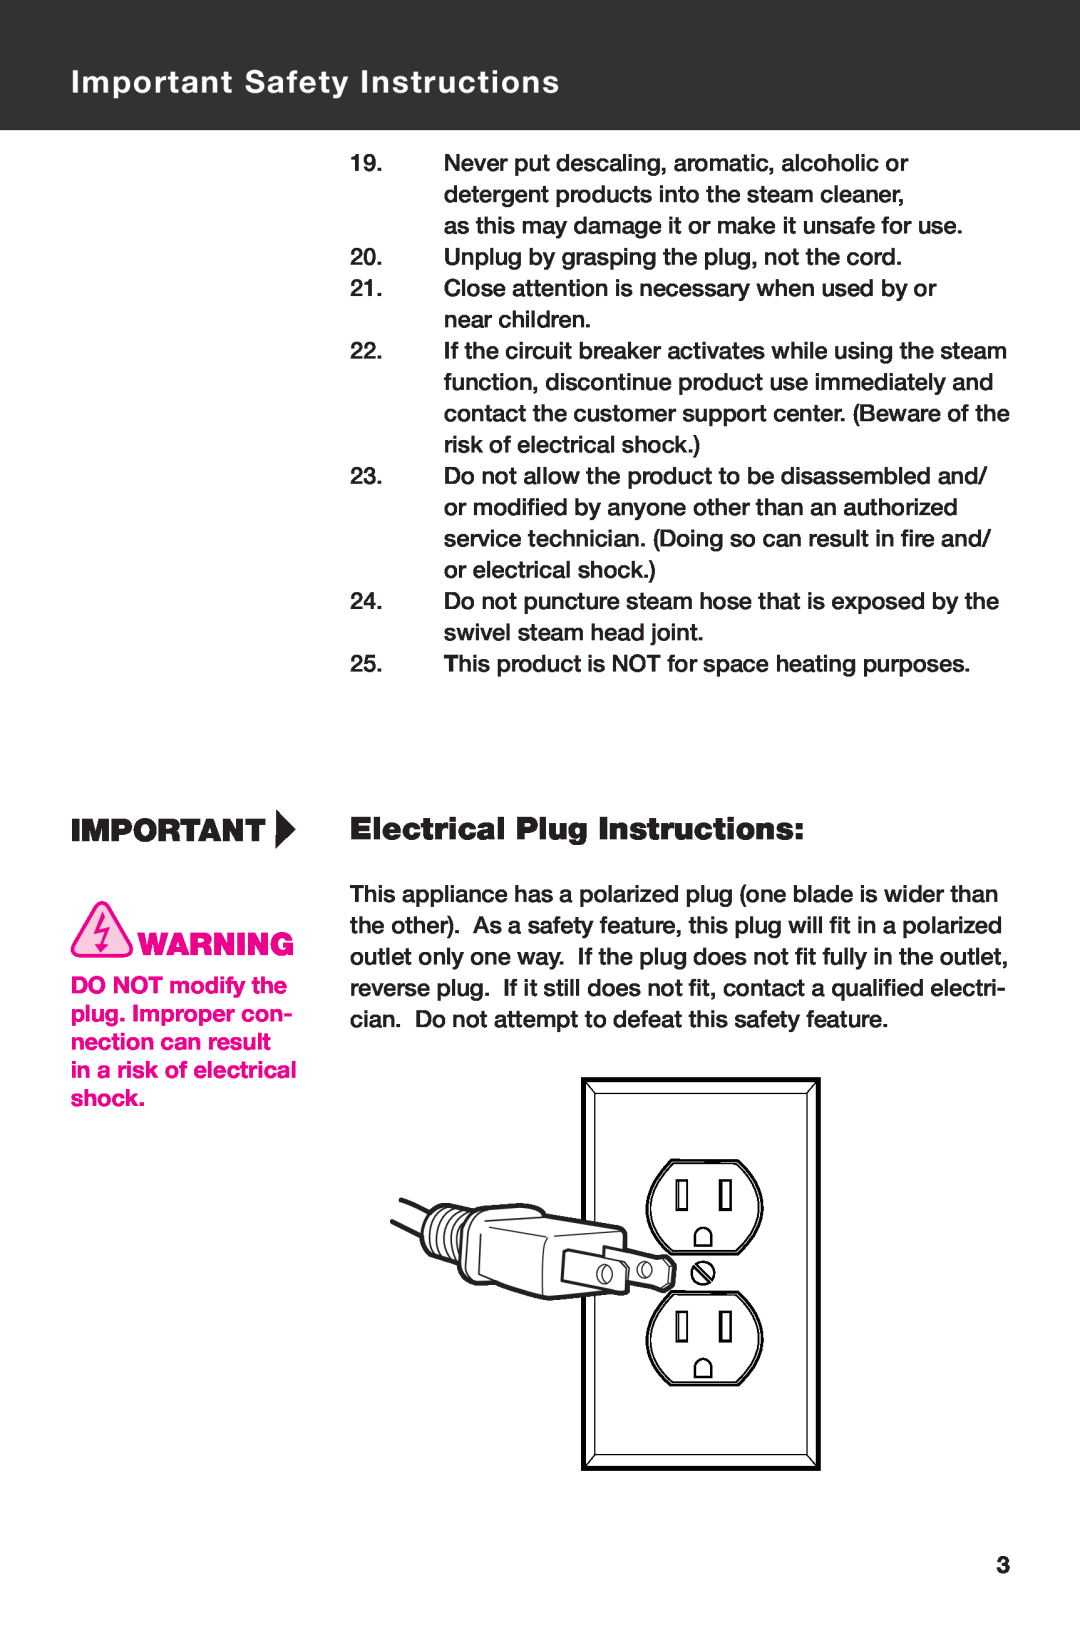 Haan SI-70 instruction manual Electrical Plug Instructions, Important Safety Instructions 